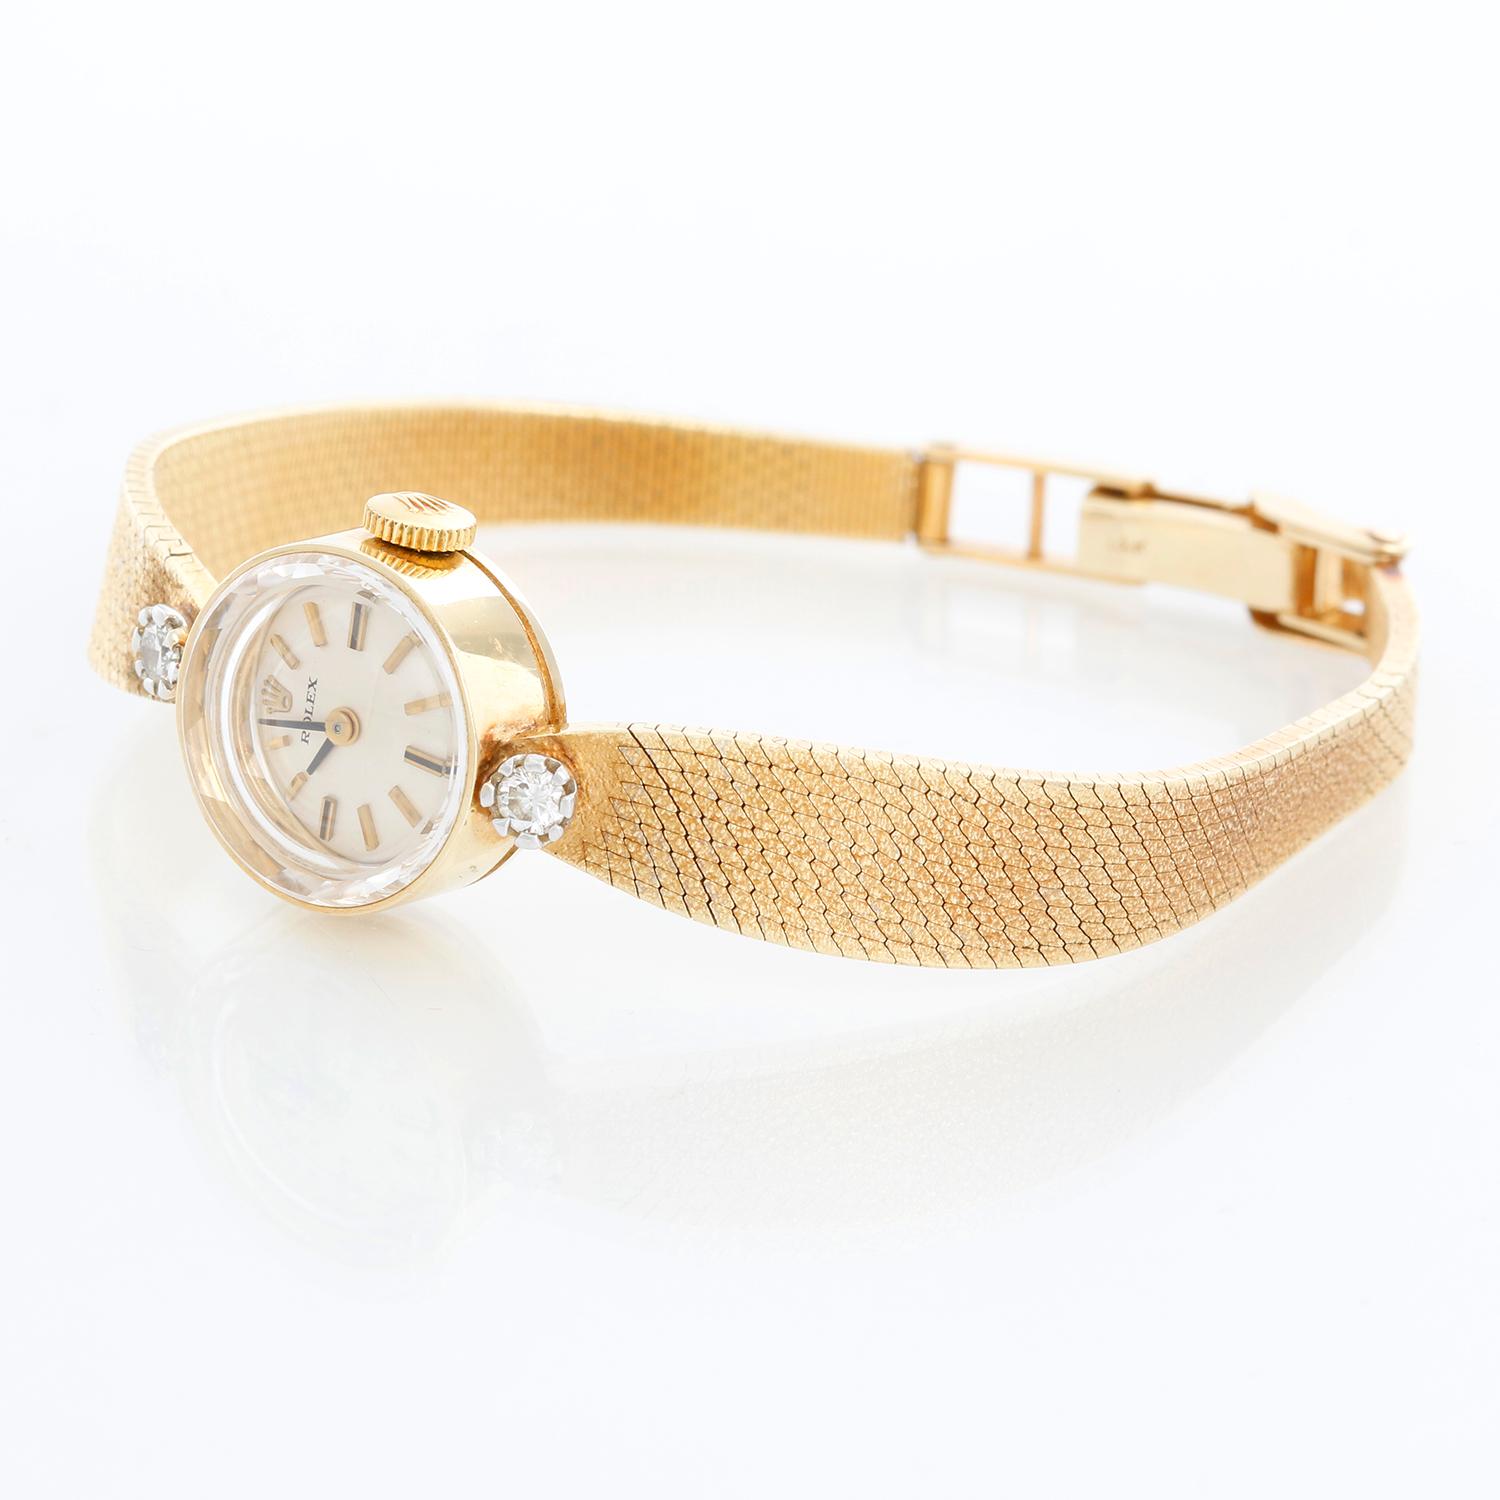 Vintage Rolex Ladies 14k Yellow Gold Watch Ref. 3523 - Manual wind. Gold case (15mm) with diamond lugs. Silver dial with stick markers. 14k gold mesh bracelet with deployant buckle; will fit up to a 5 3/4 inch wrist . Pre-owned with custom box .